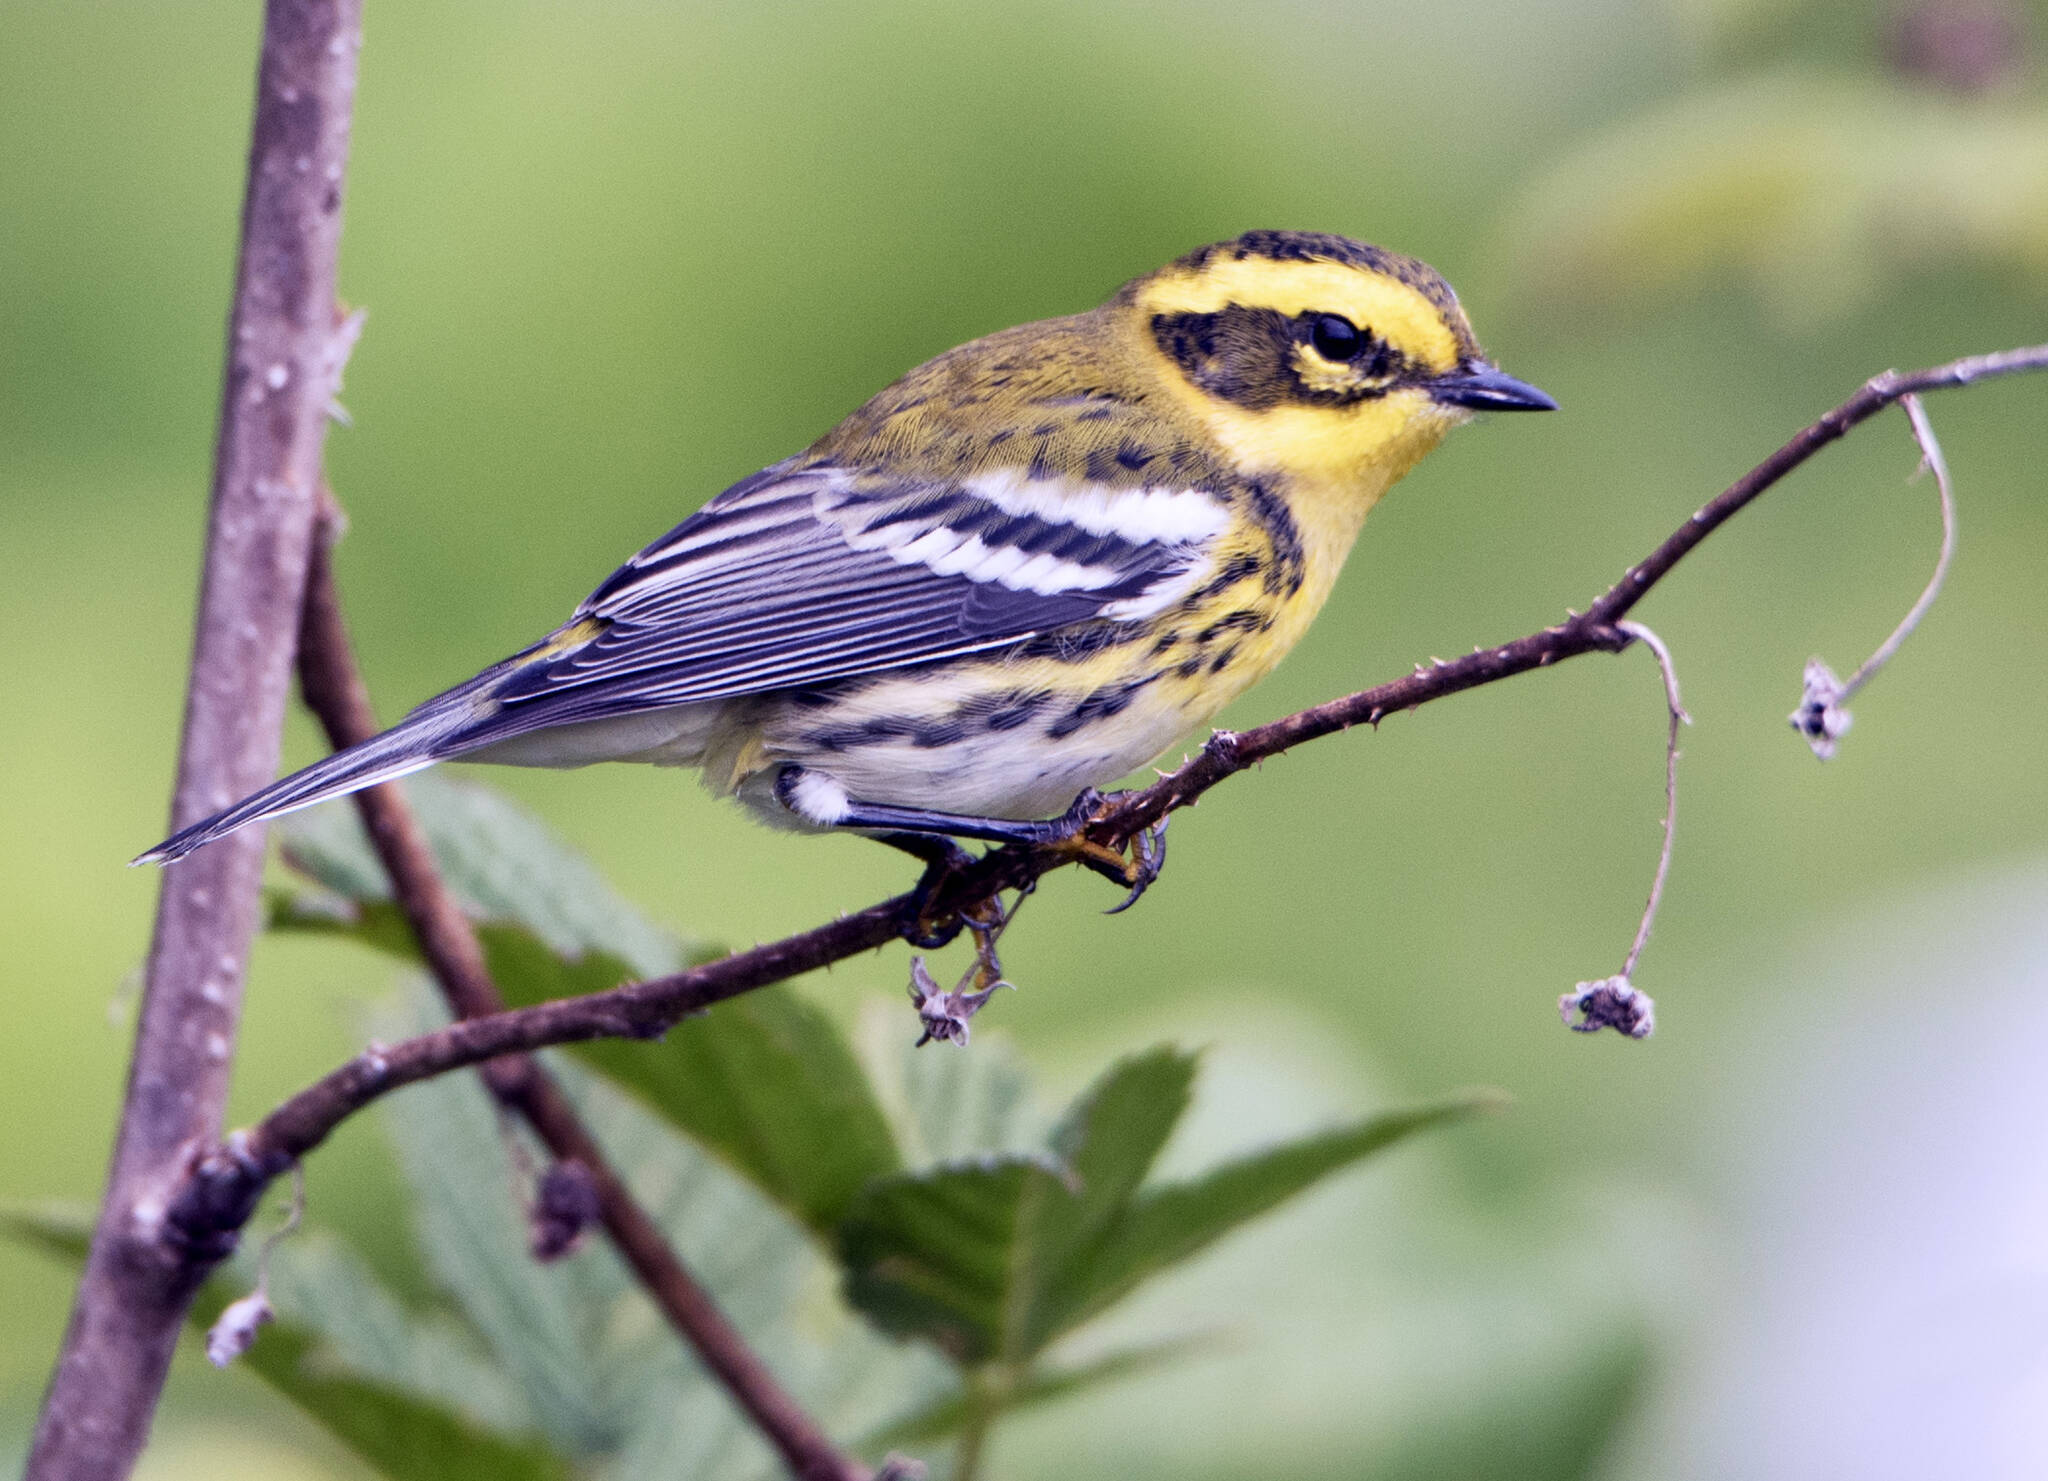 A Townsend’s warbler perches on a salmonberry bush. (Courtesy Photo / Kenneth Gill, gillfoto)